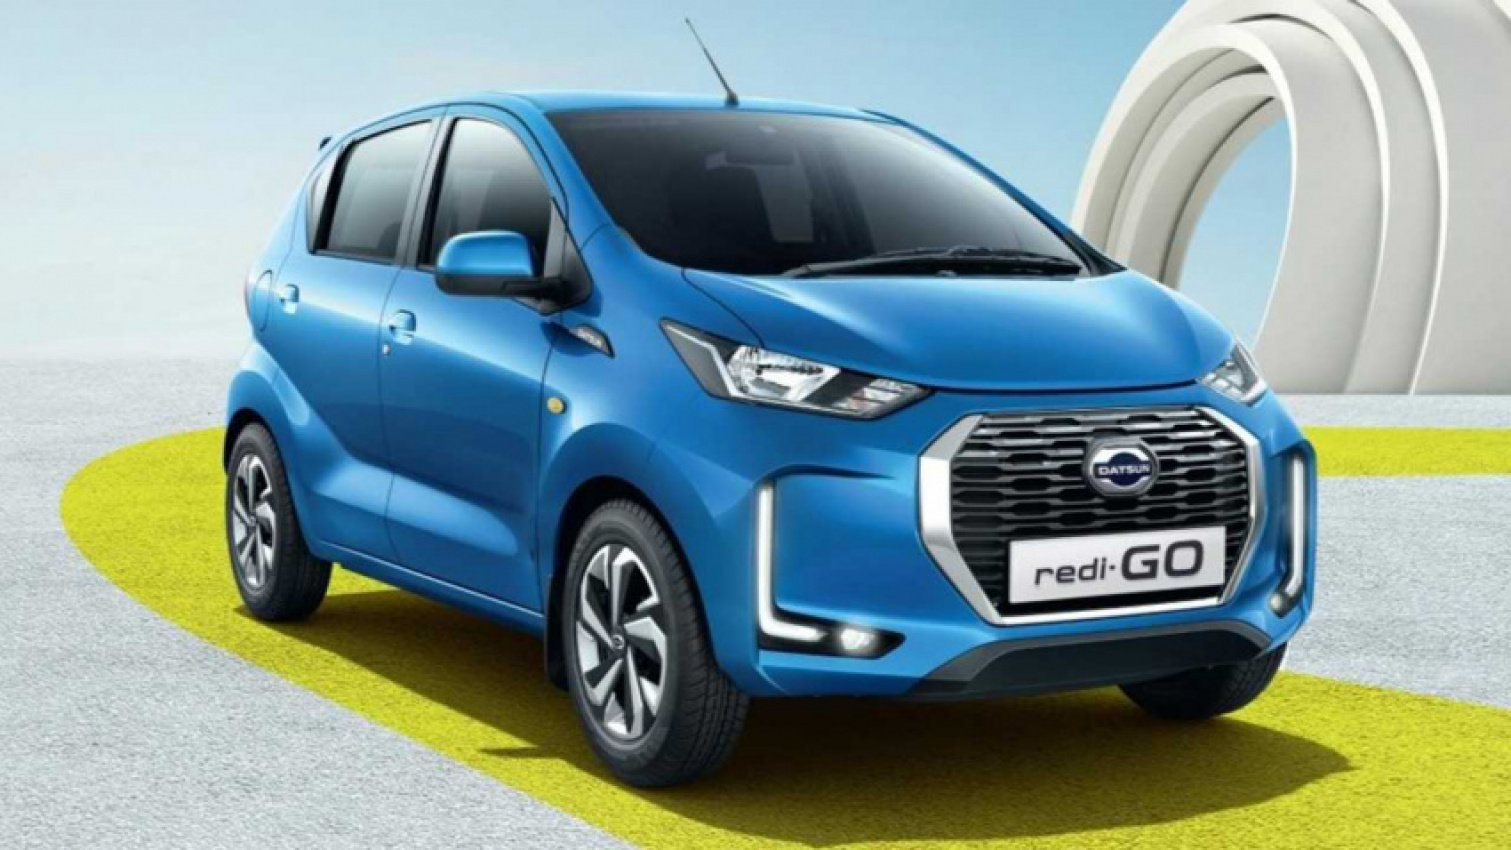 autos, cars, datsun, datsun could return yet again as ev brand for emerging markets: report